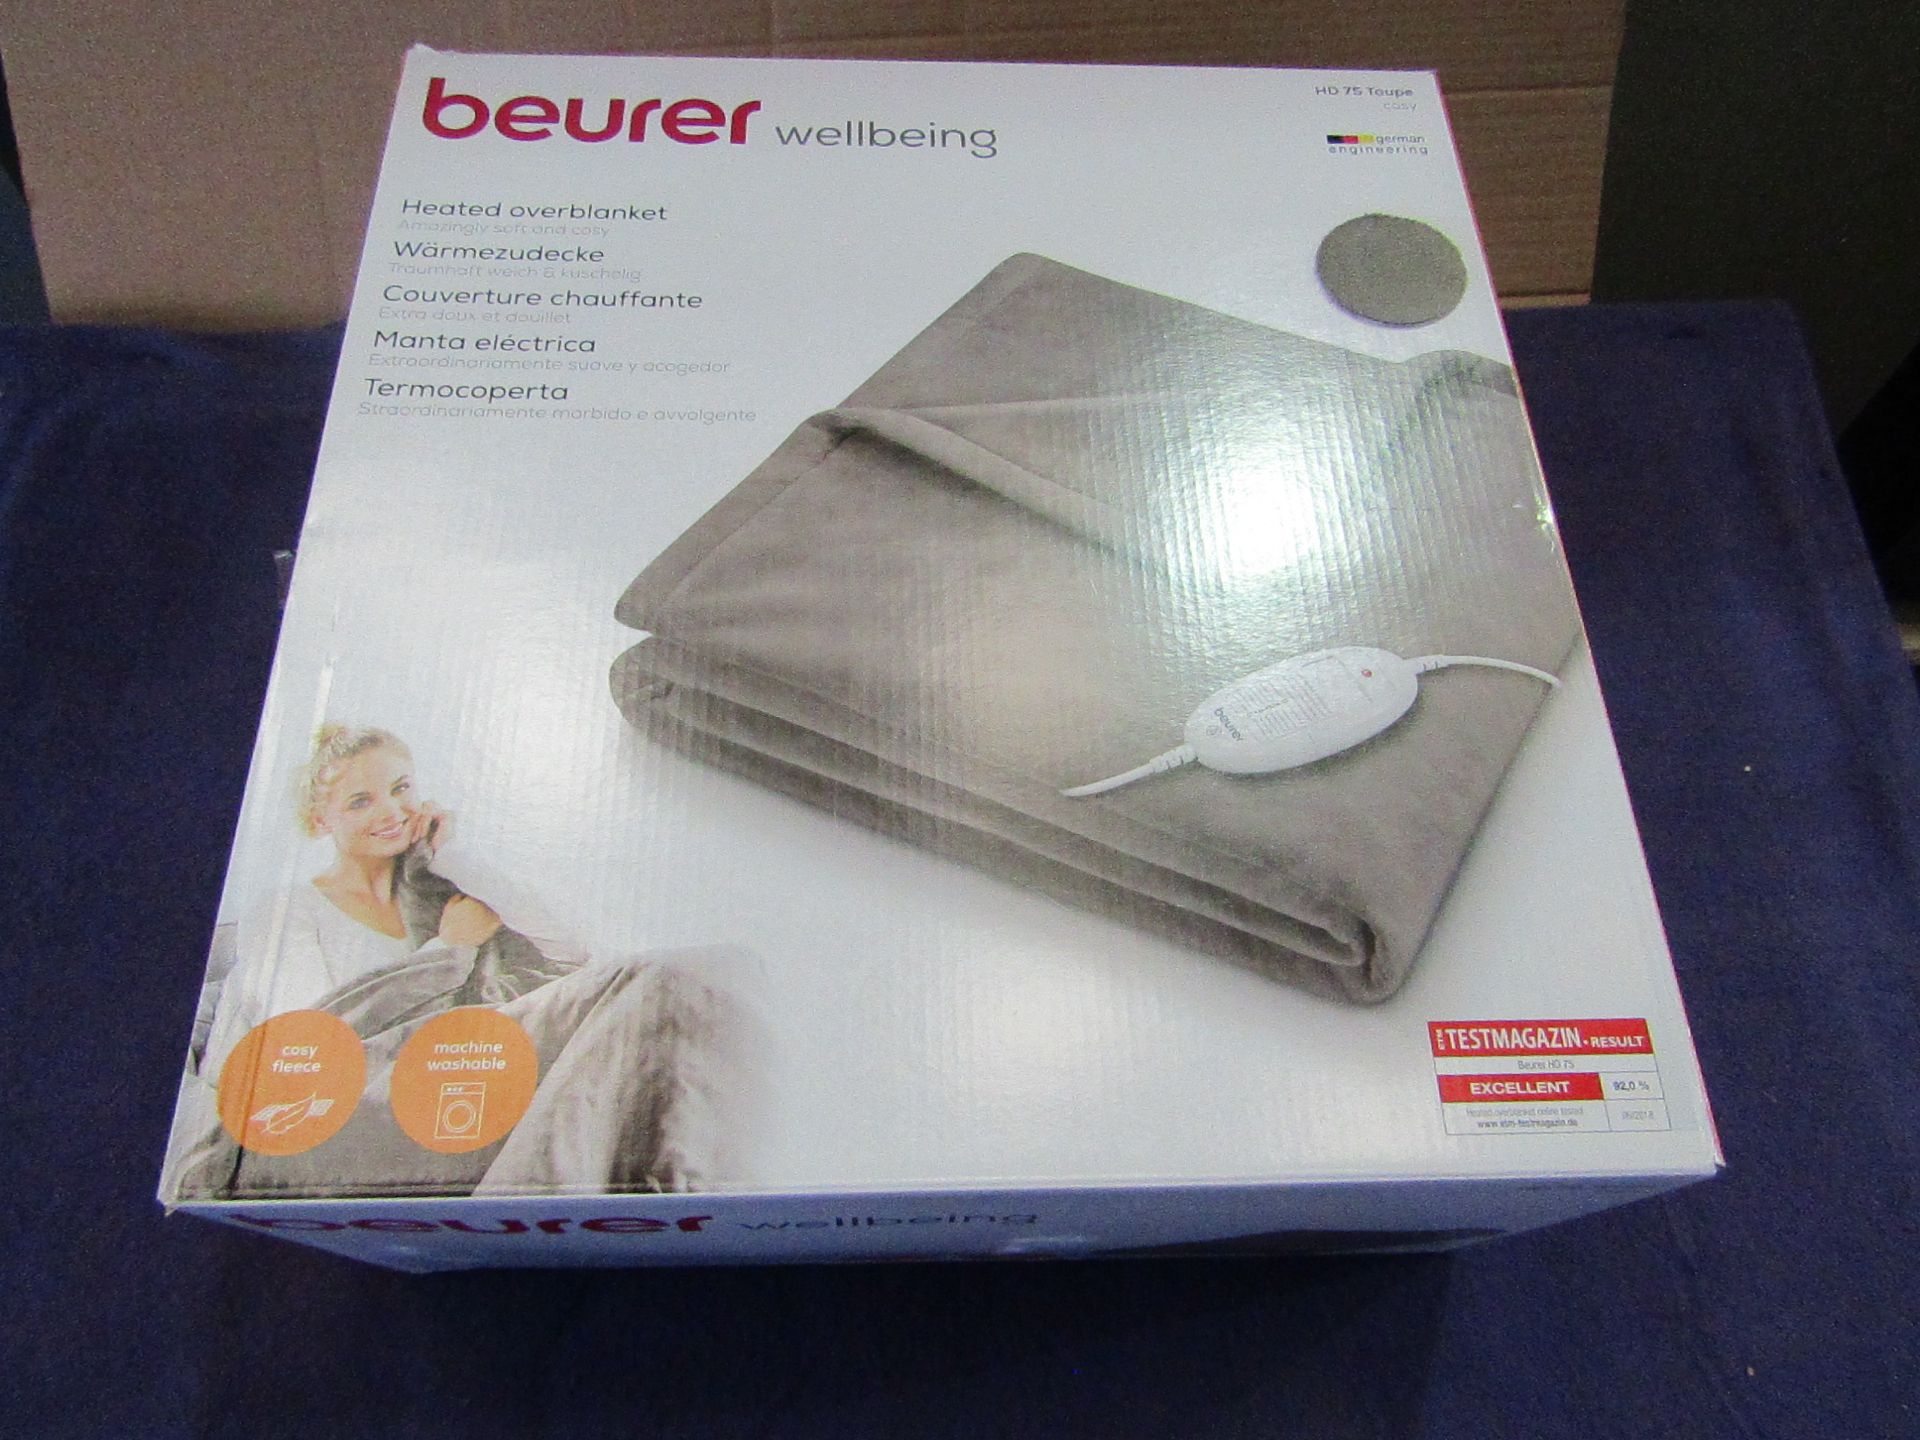 5x Beurer - Heated Overblanket Soft & Cosy - Colour Taupe HD75 - Looks In Good Condition & Boxed.